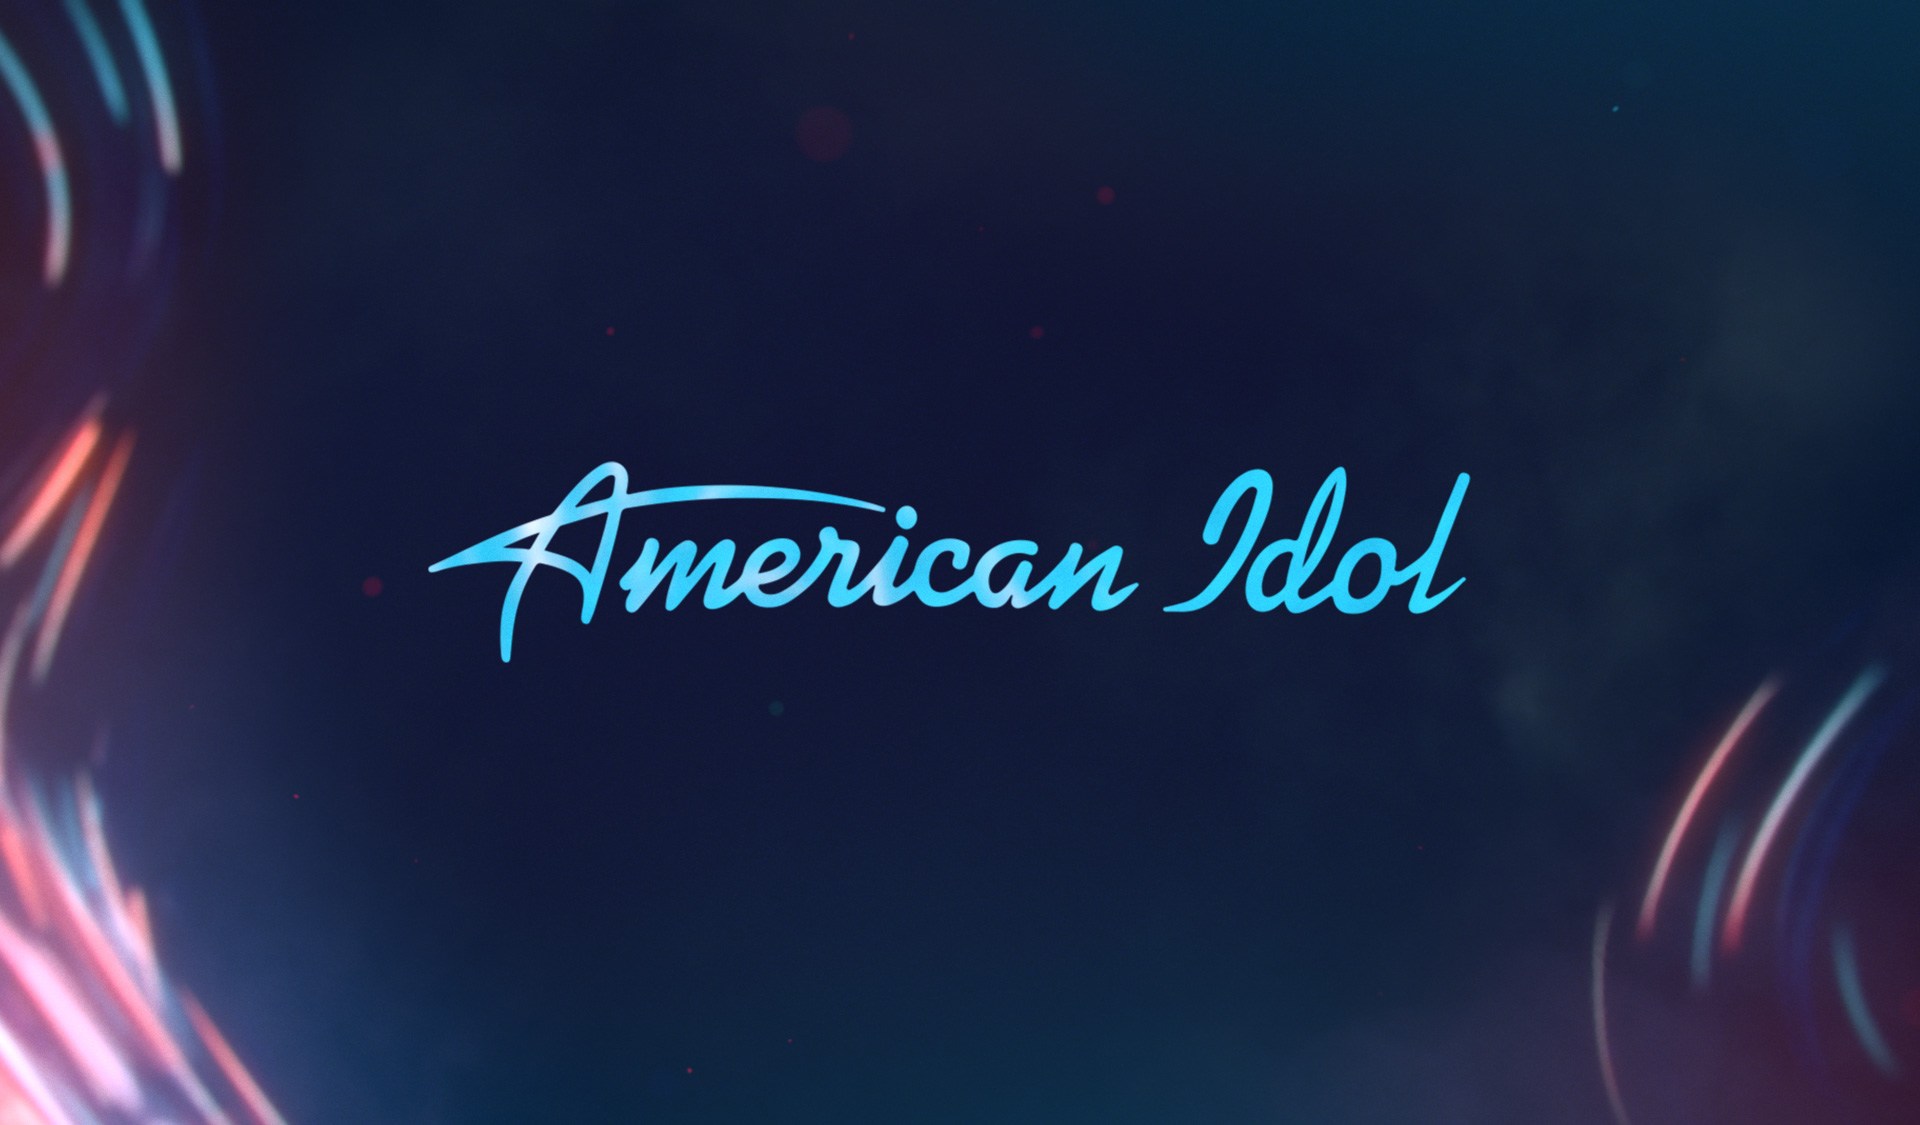 10 Of The Greatest Voices On 'American Idol'